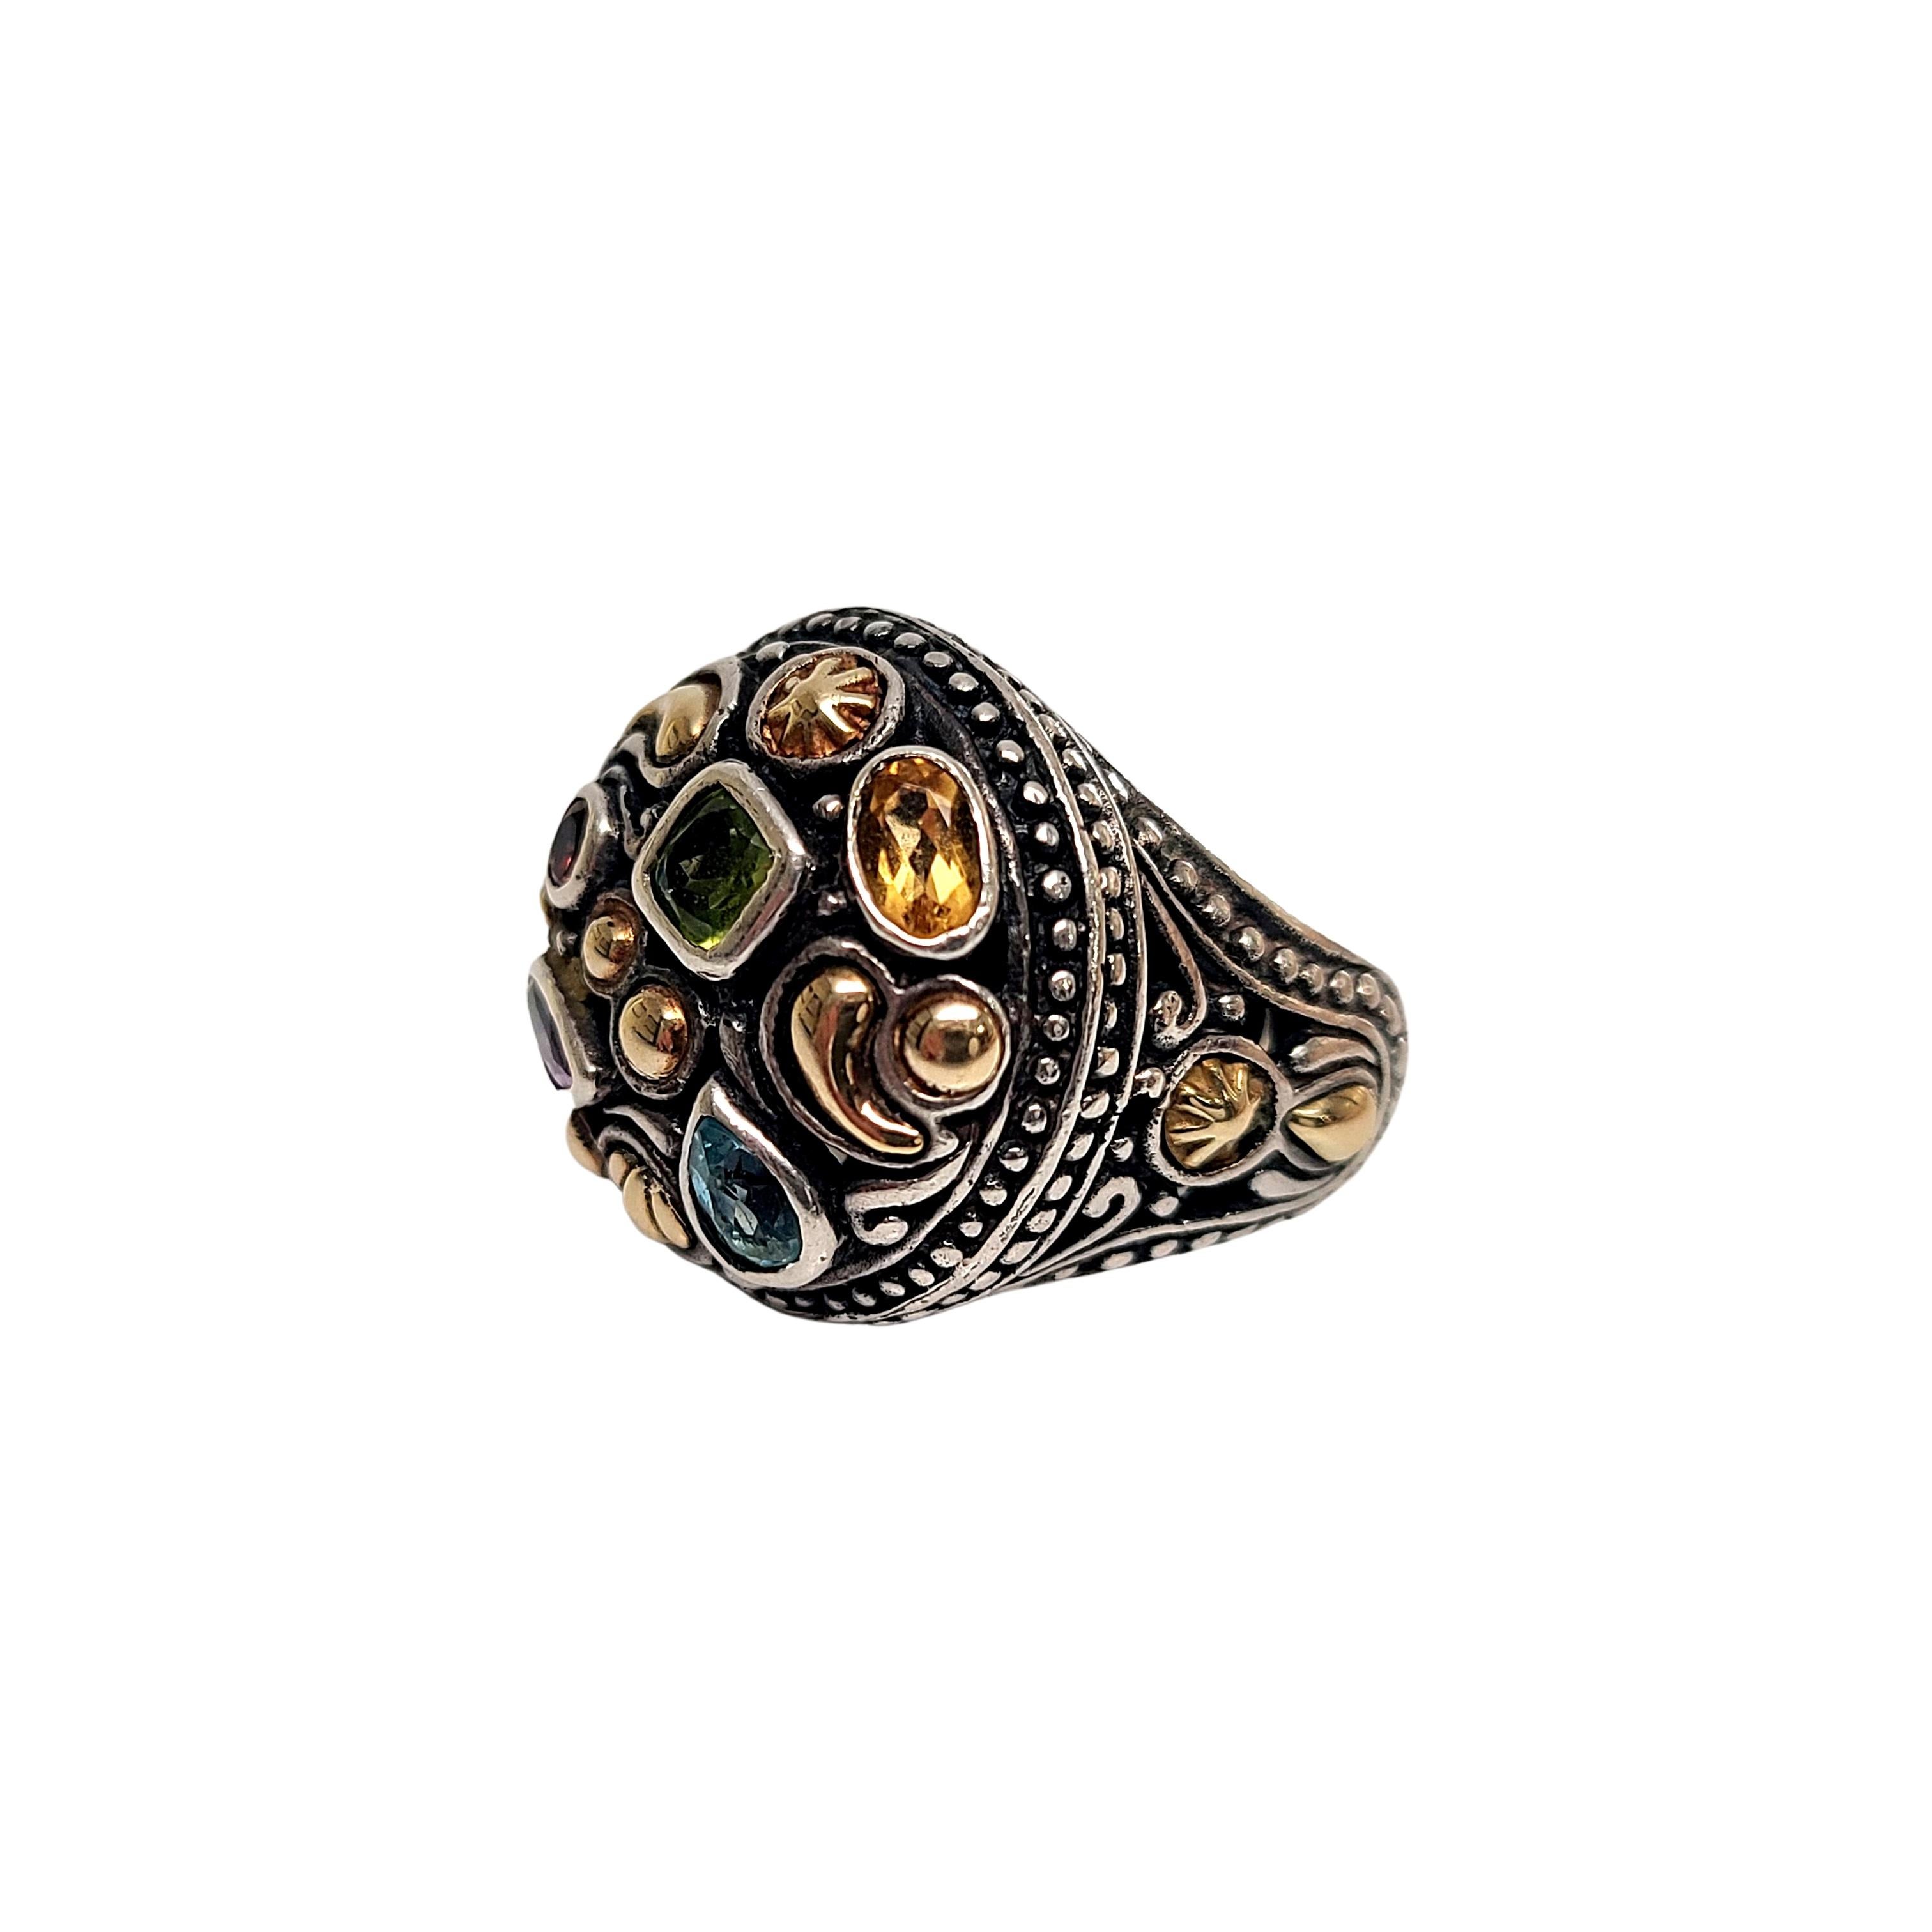 Sterling silver and multi-gemstone ring by designer Samuel Benham, signed BJC.

Size 5 1/2

Sterling silver ring featuring 18K gold plated over sterling silver accents on the top and shoulders. Stone appear to by amethyst, peridot, blue topaz,